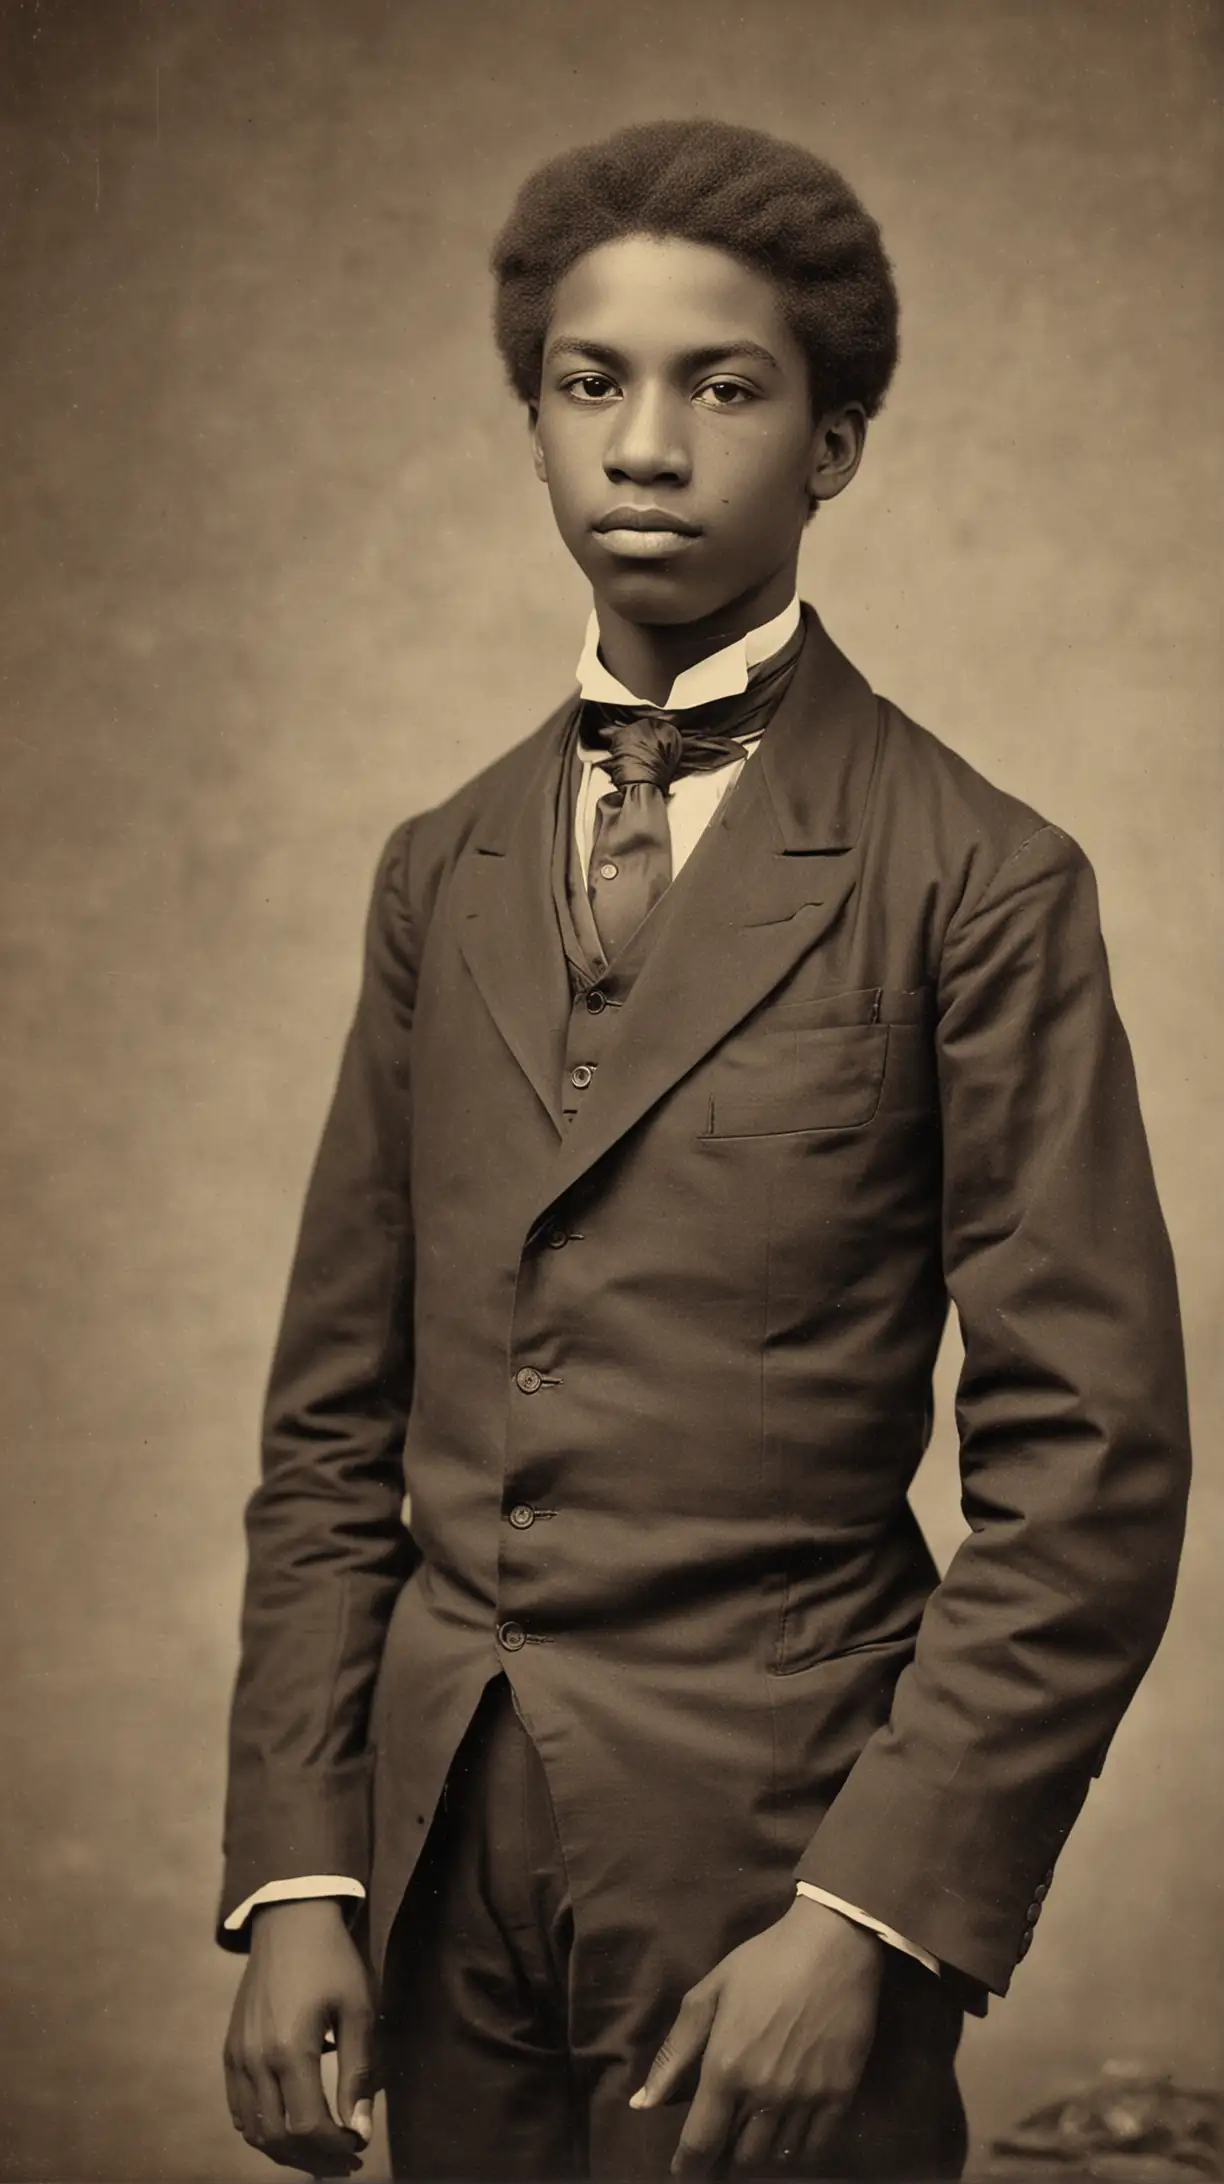 Portrait of a Handsome 17YearOld African American Teenager from 1878